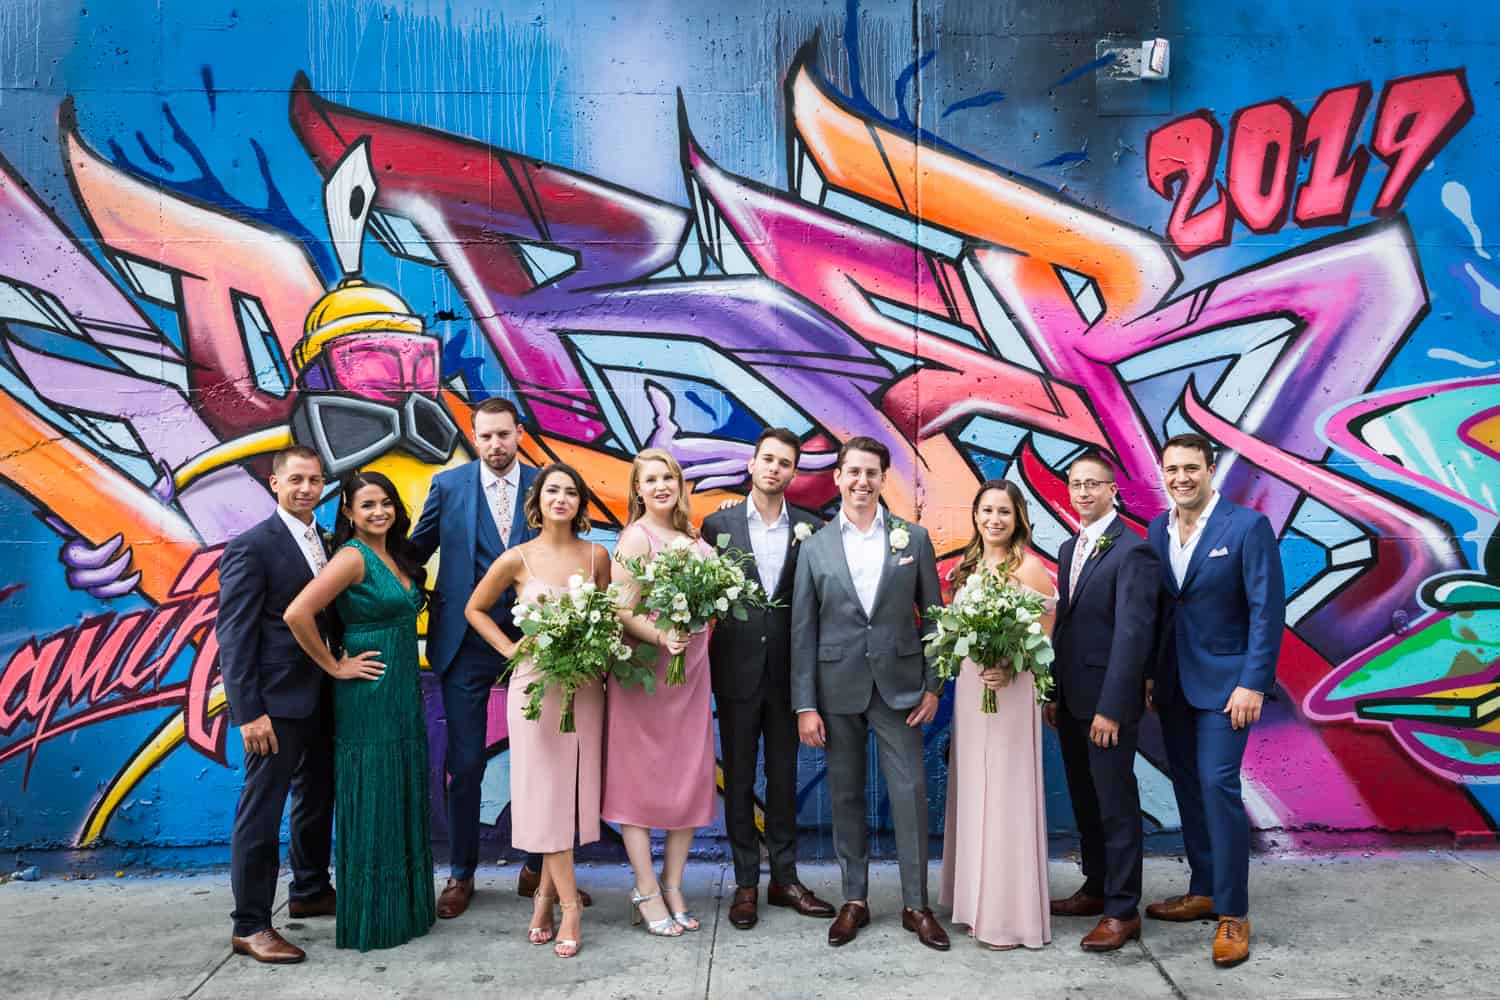 Bridal party in front of colorful mural in Greenpoint, Brooklyn